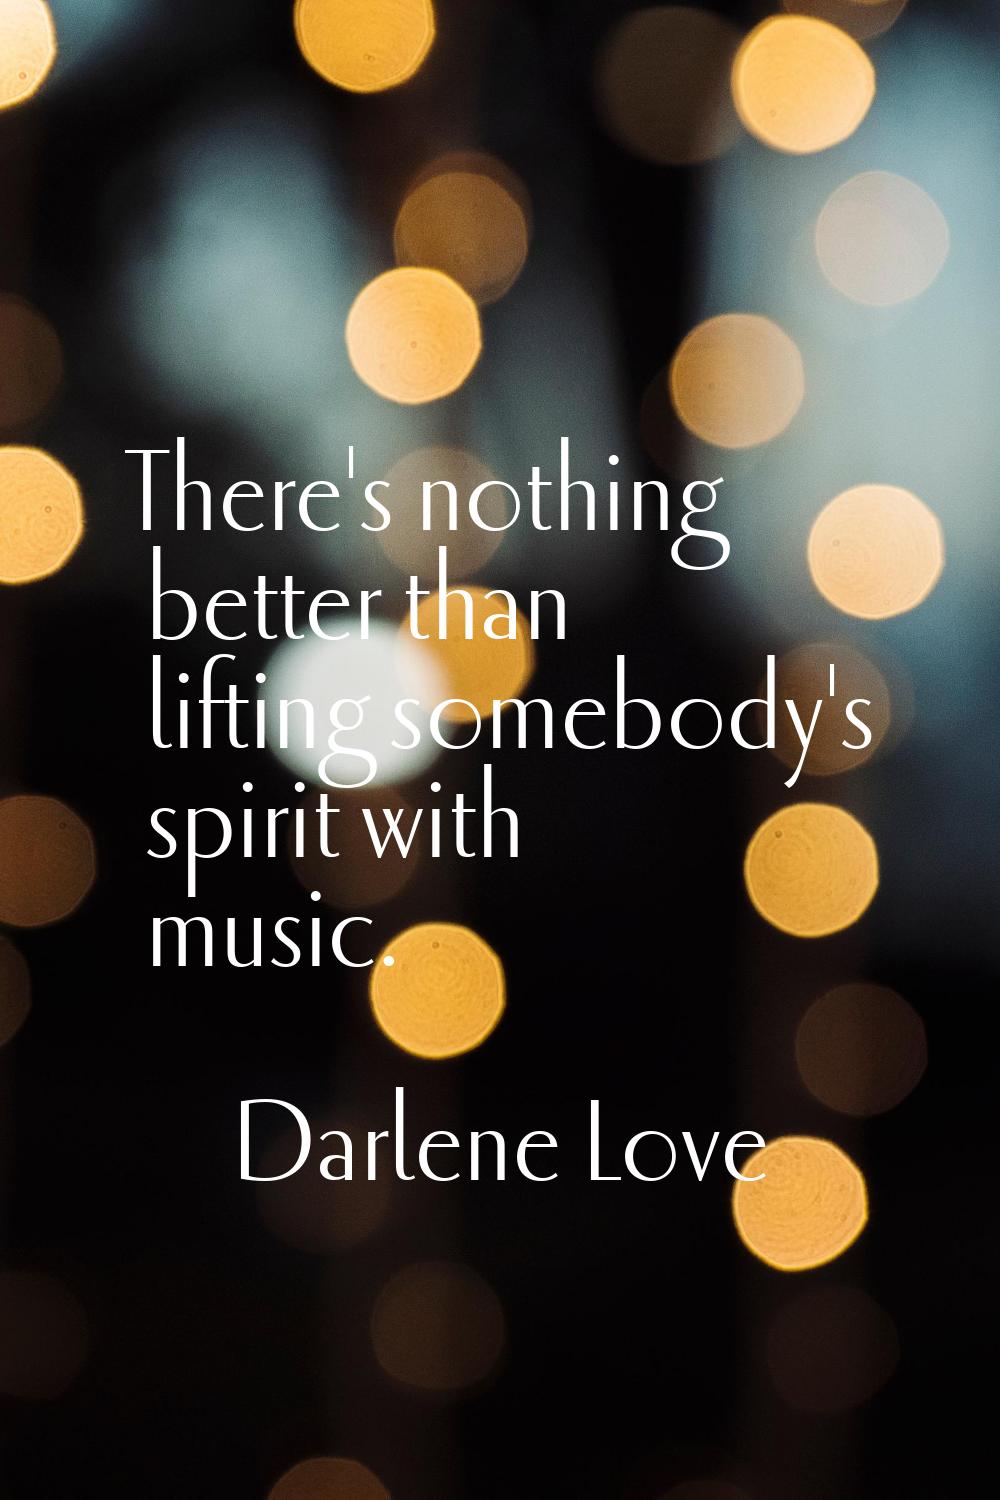 There's nothing better than lifting somebody's spirit with music.